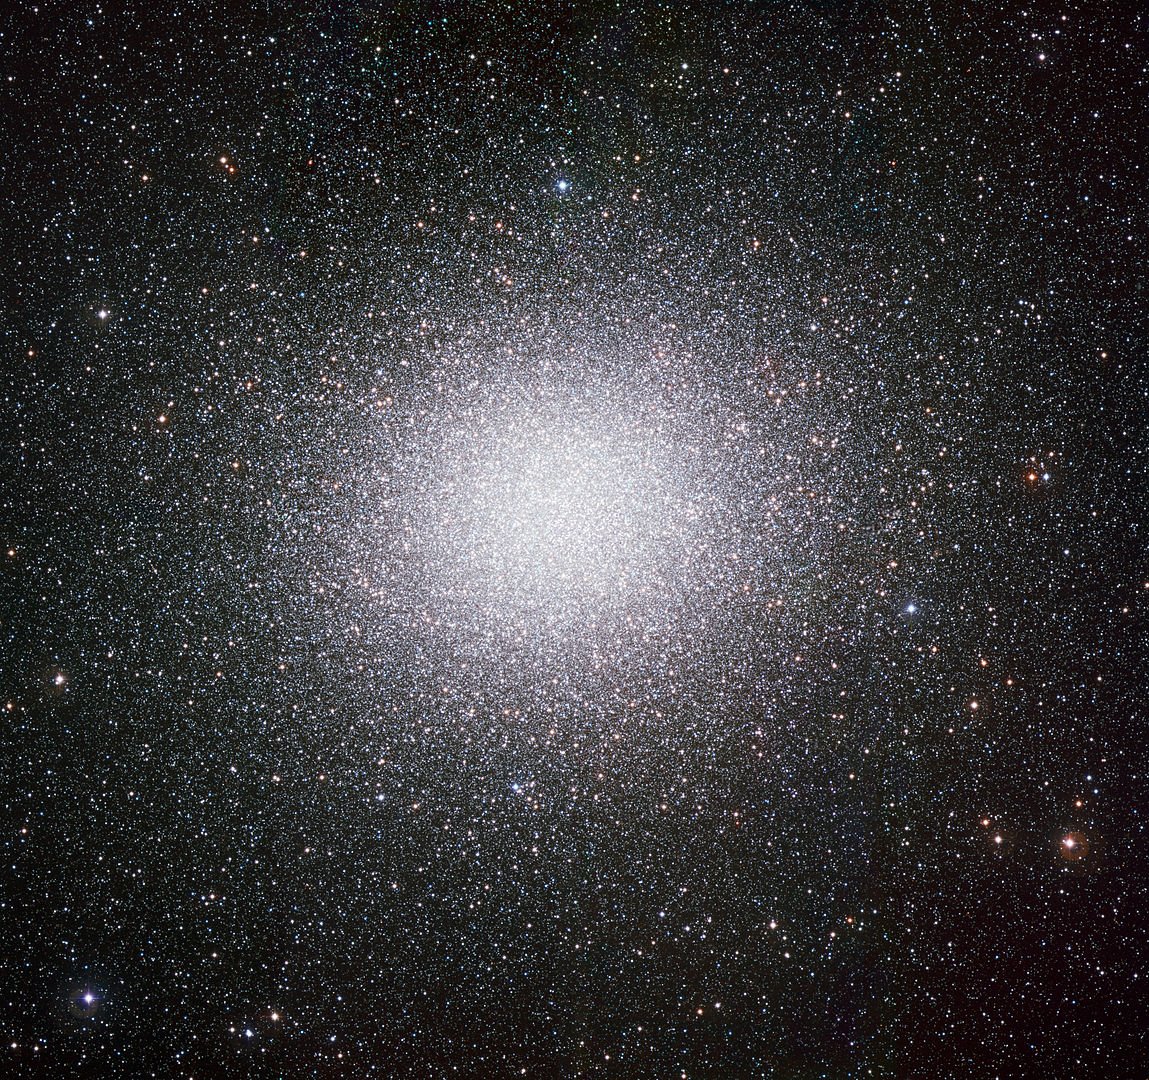 Omega Centauri is the brightest globular cluster in the night sky. It holds about 10 million stars and is the most massive globular cluster in the Milky Way. It's possible that globulars and nuclear star clusters are related in some way as a galaxy evolves. Image Credit: ESO.